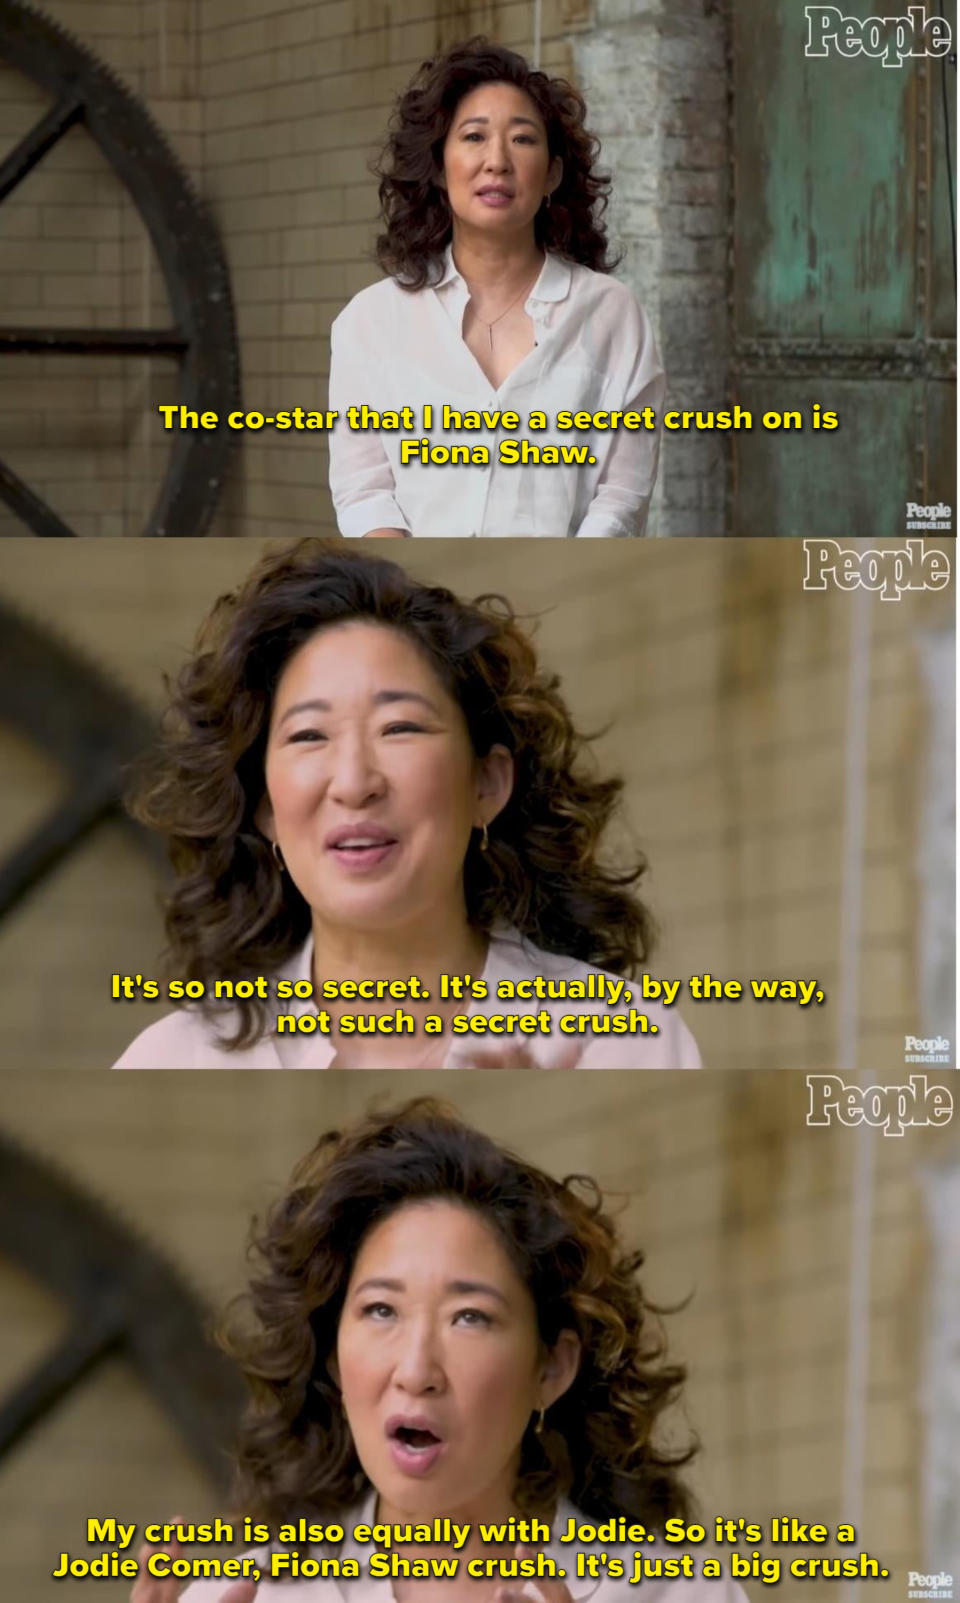 Sandra Oh talks about how she has a secret crush on Fiona Shaw and Jodie Comer